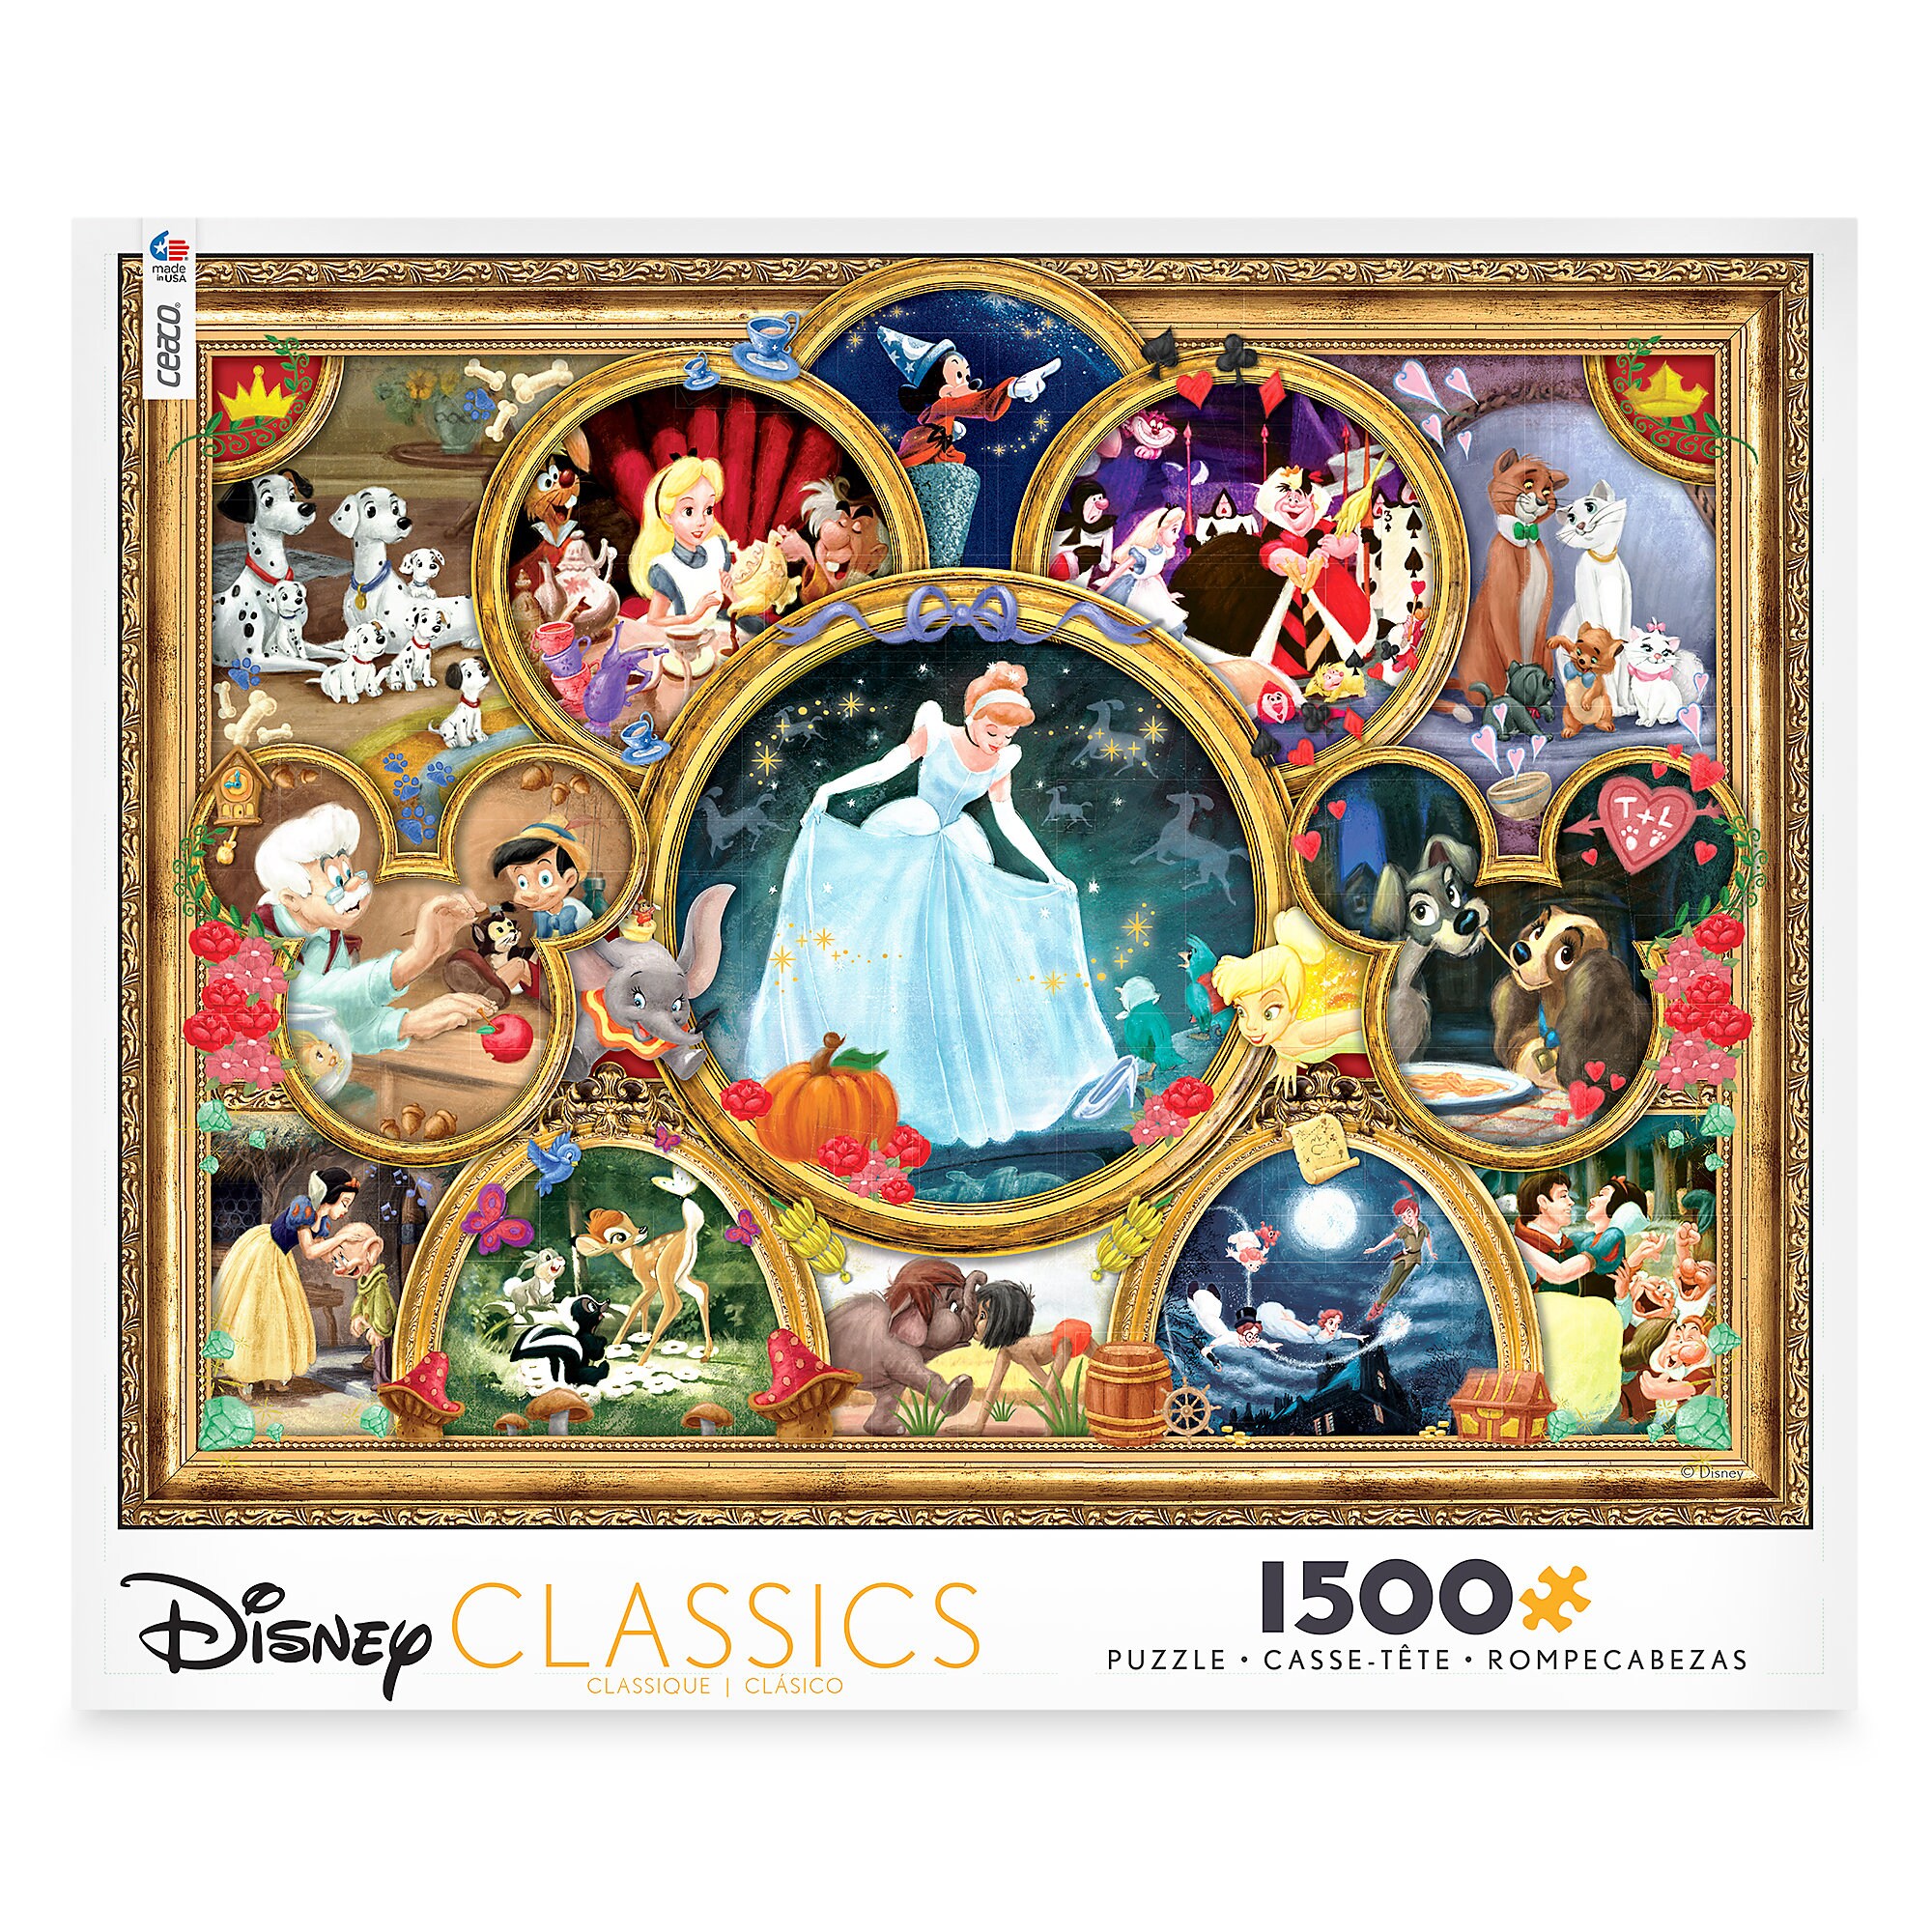 Disney Classics Jigsaw Puzzle by Ceaco